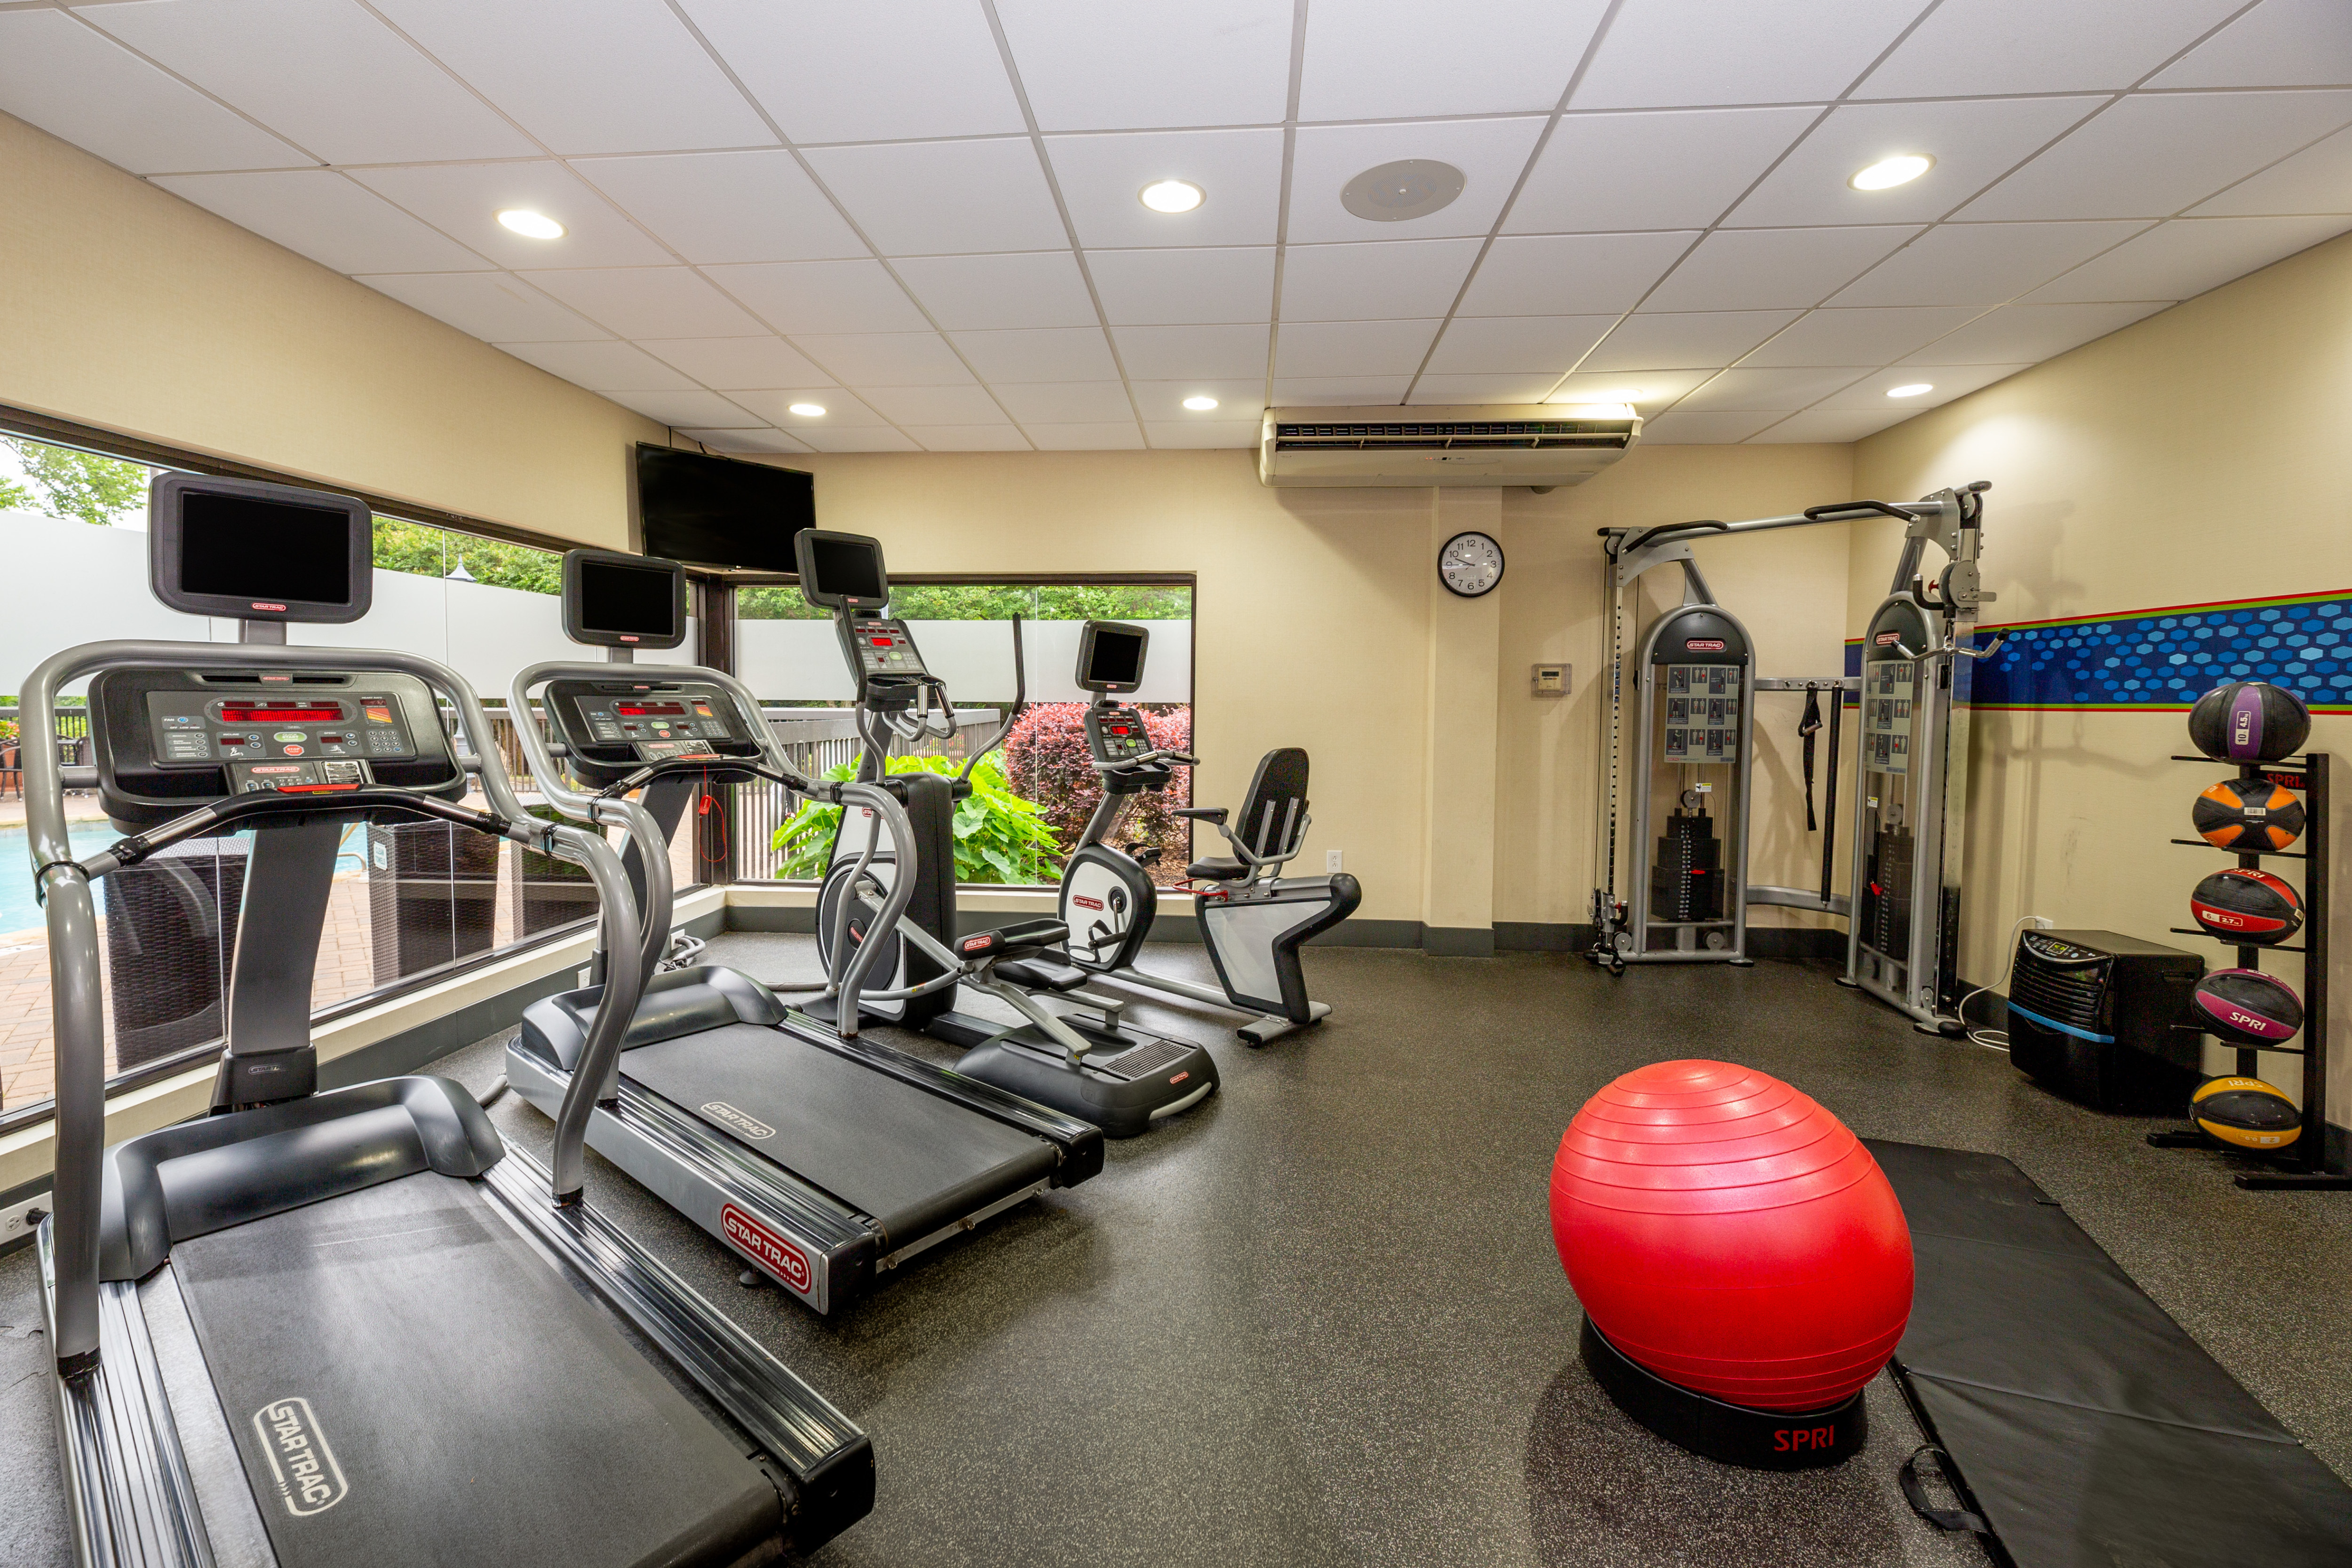 Treadmills and Exercise Balls in Fitness Center